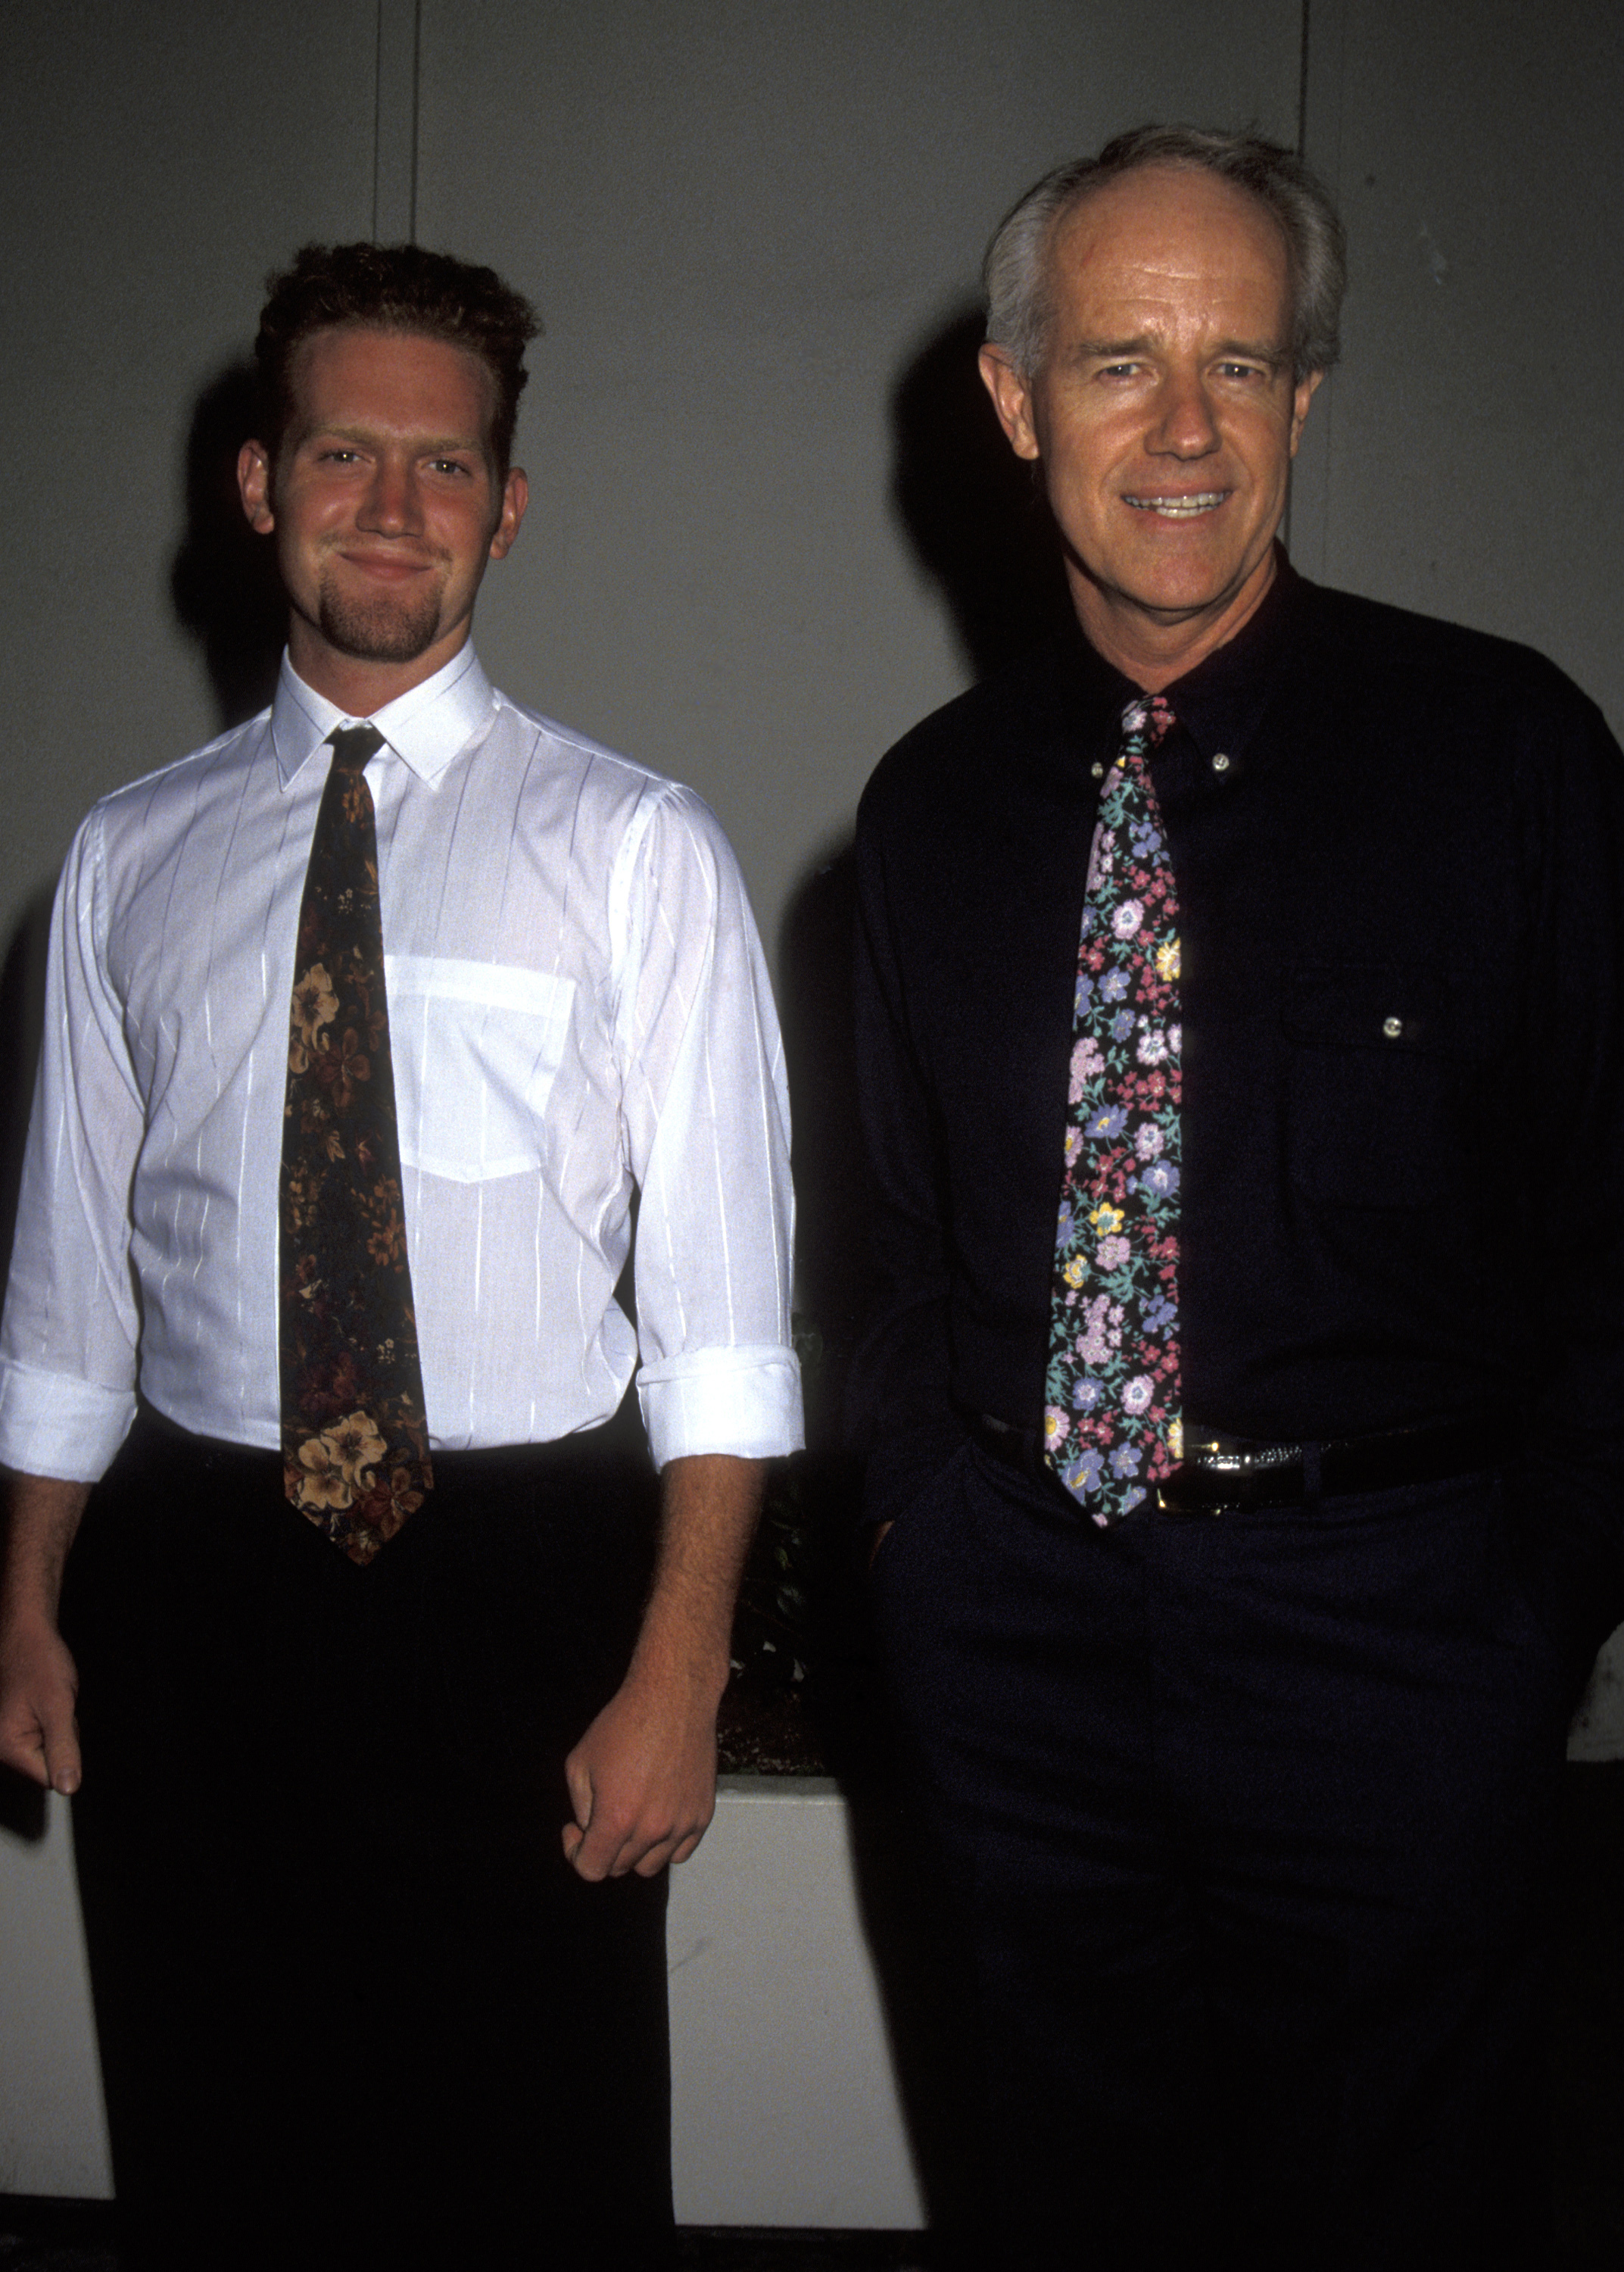 Michael and Mike Farrell at the premiere of "Bob Roberts" in Beverly Hills, California on September 1, 1992 | Source: Getty Images